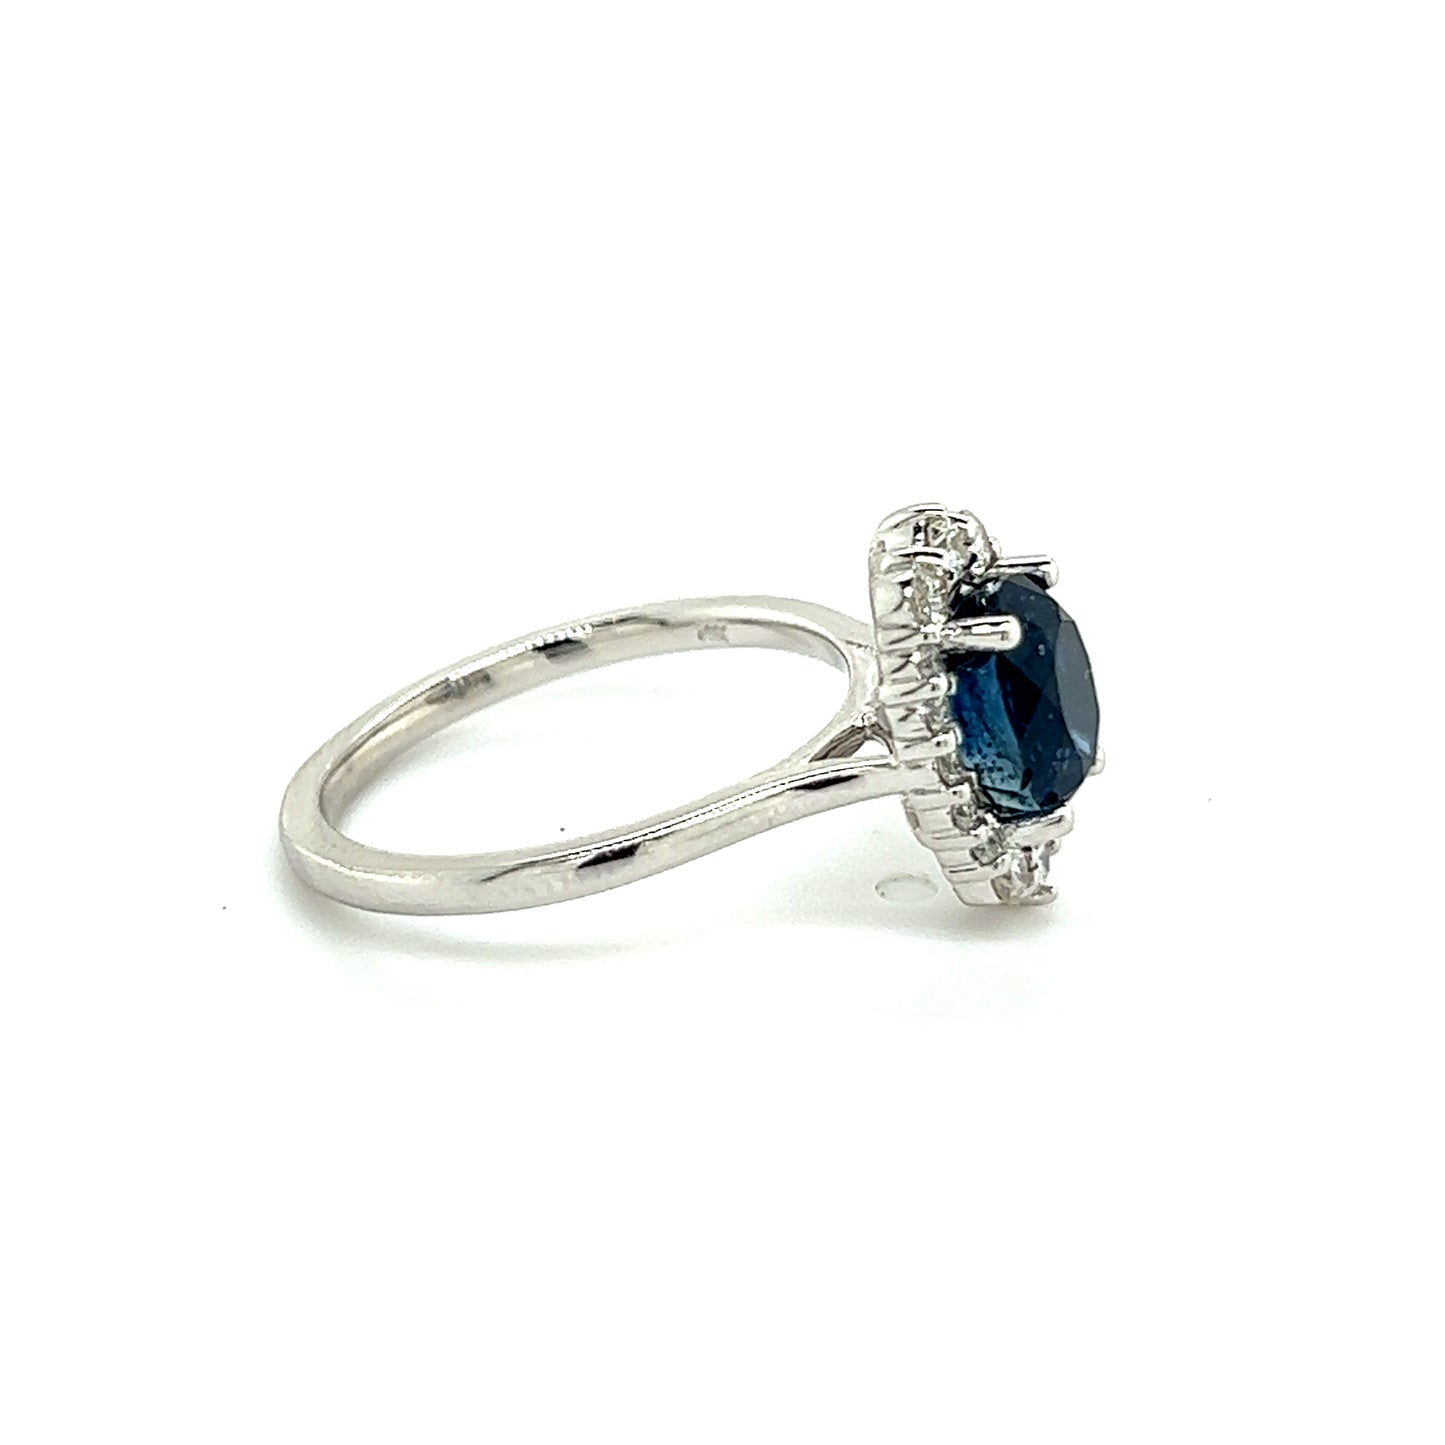 Natural Sapphire Diamond Ring Size 6.5 14k W Gold 2.29 TCW Certified $2,850 216681